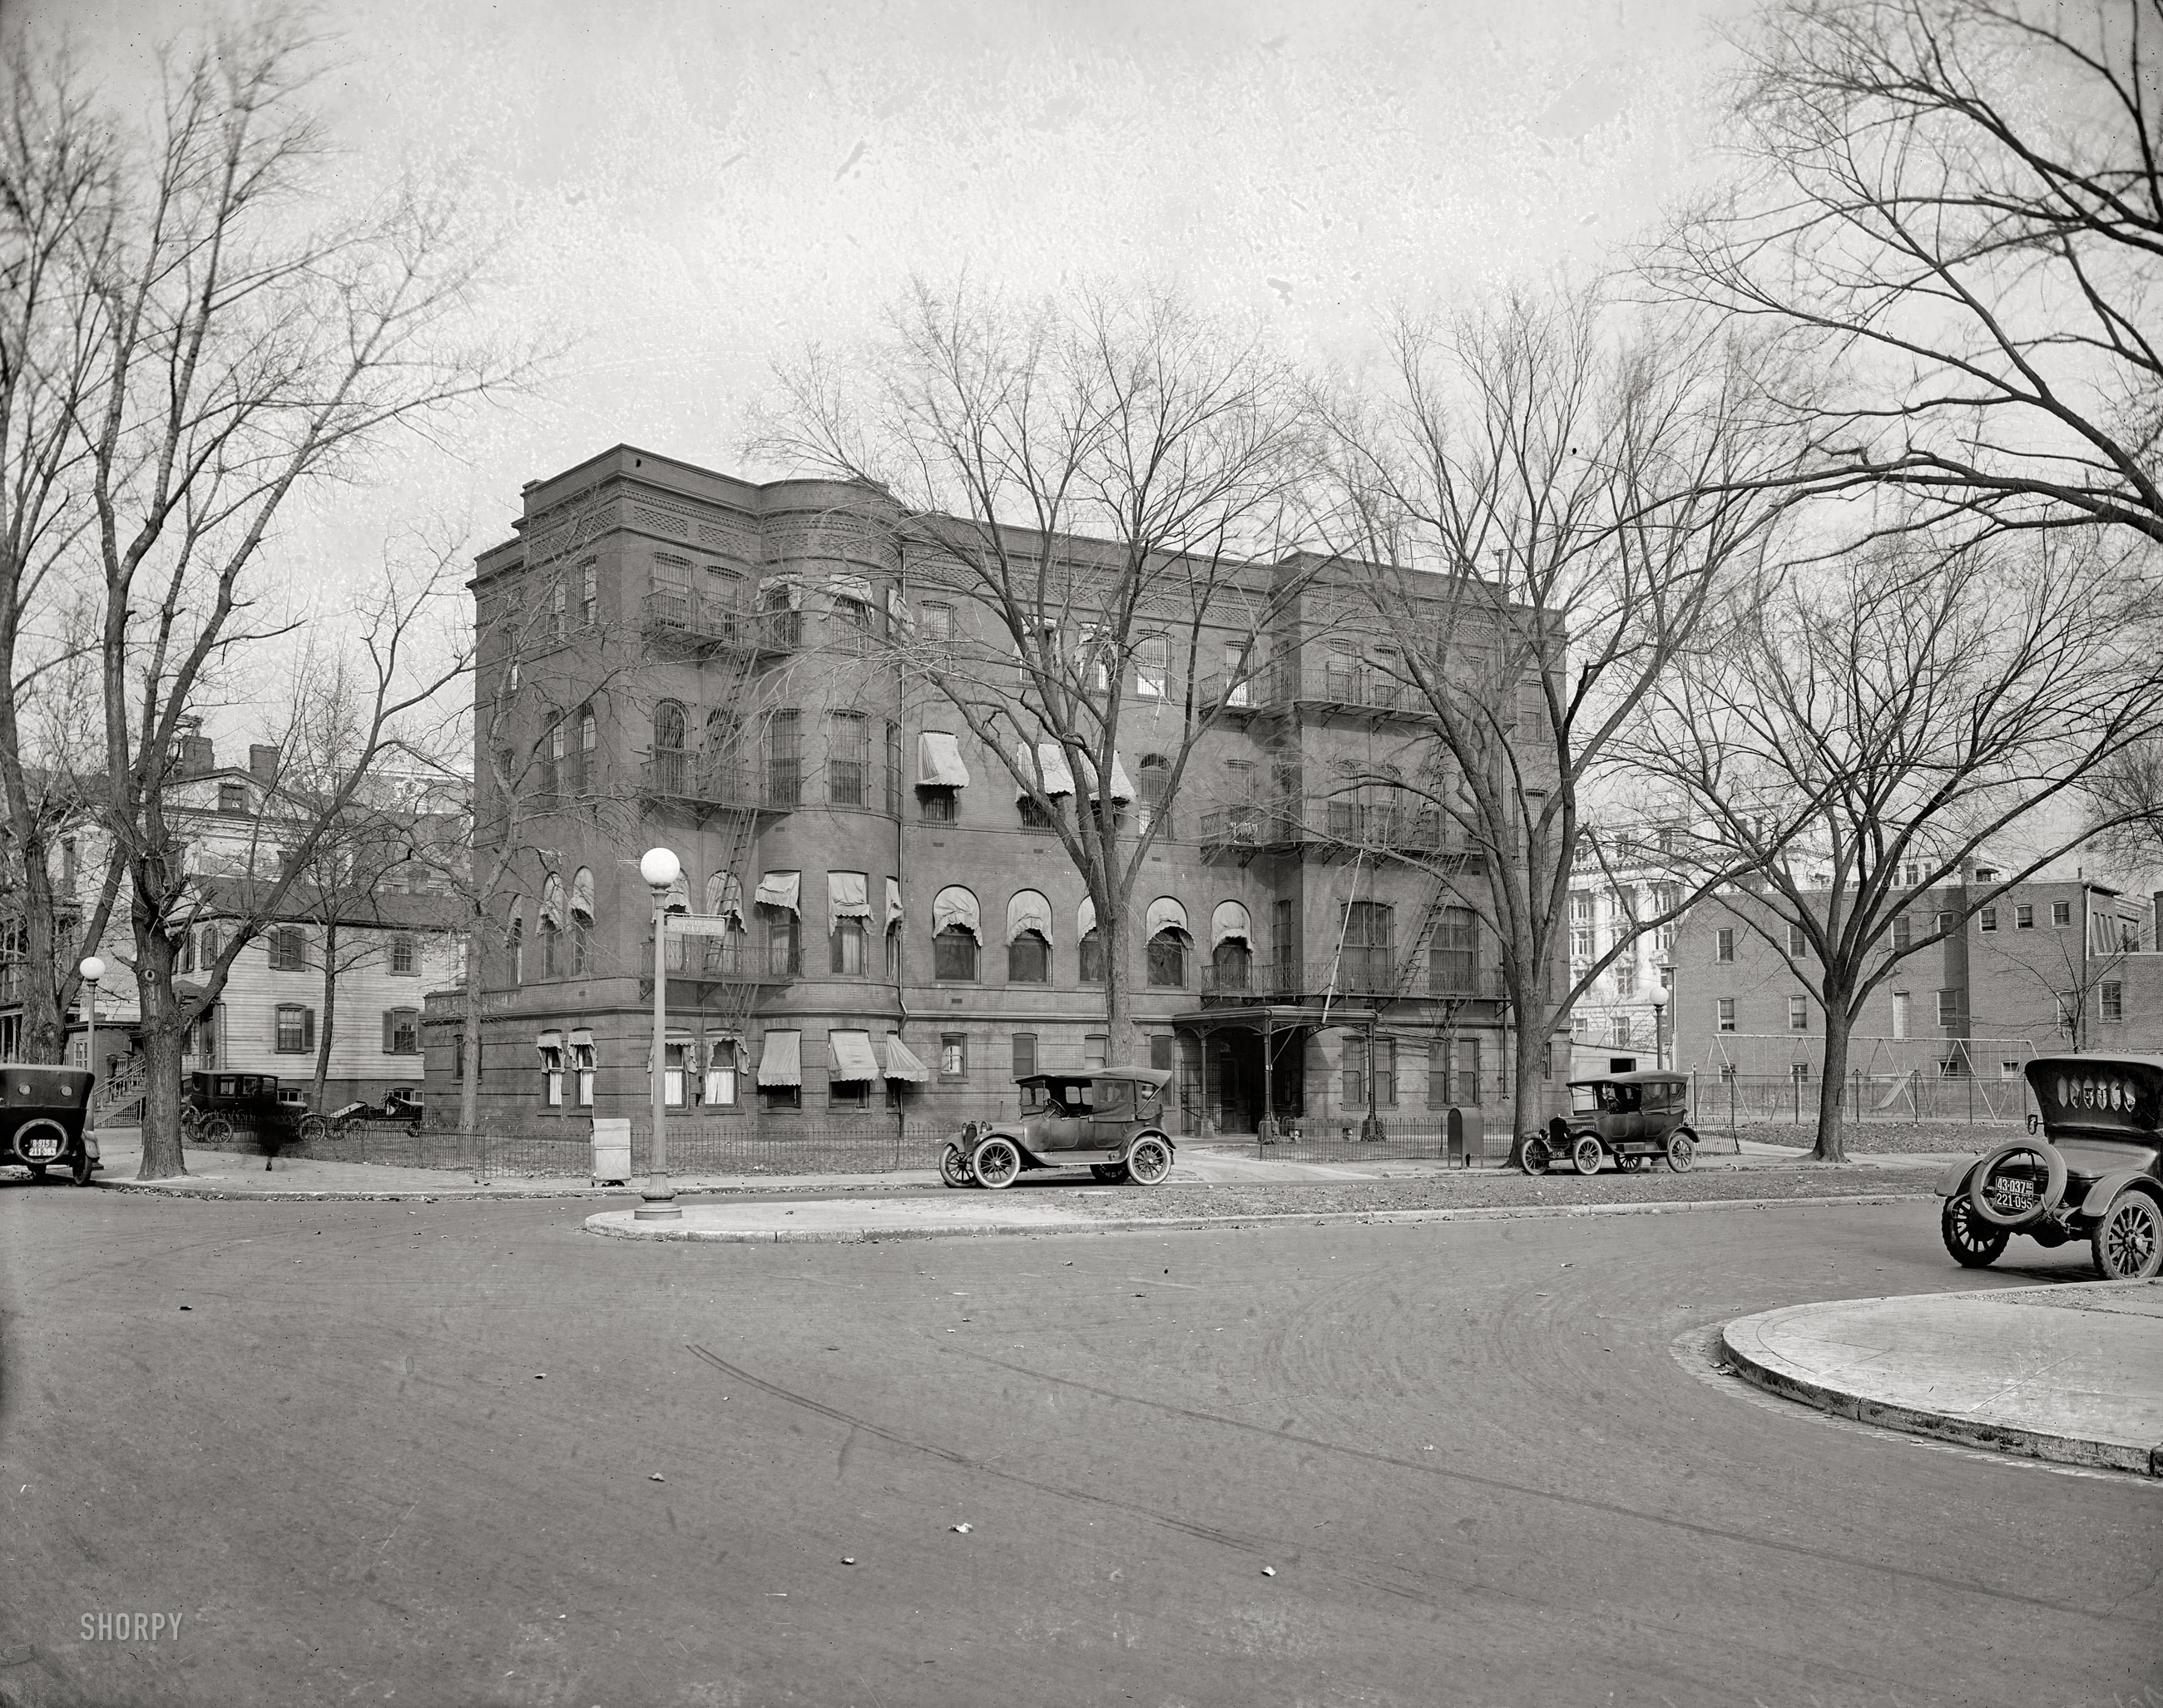 Washington, D.C., circa 1922. "House of Detention, Ohio Avenue N.W." Equipped with a nice playground. National Photo Company glass negative. View full size.